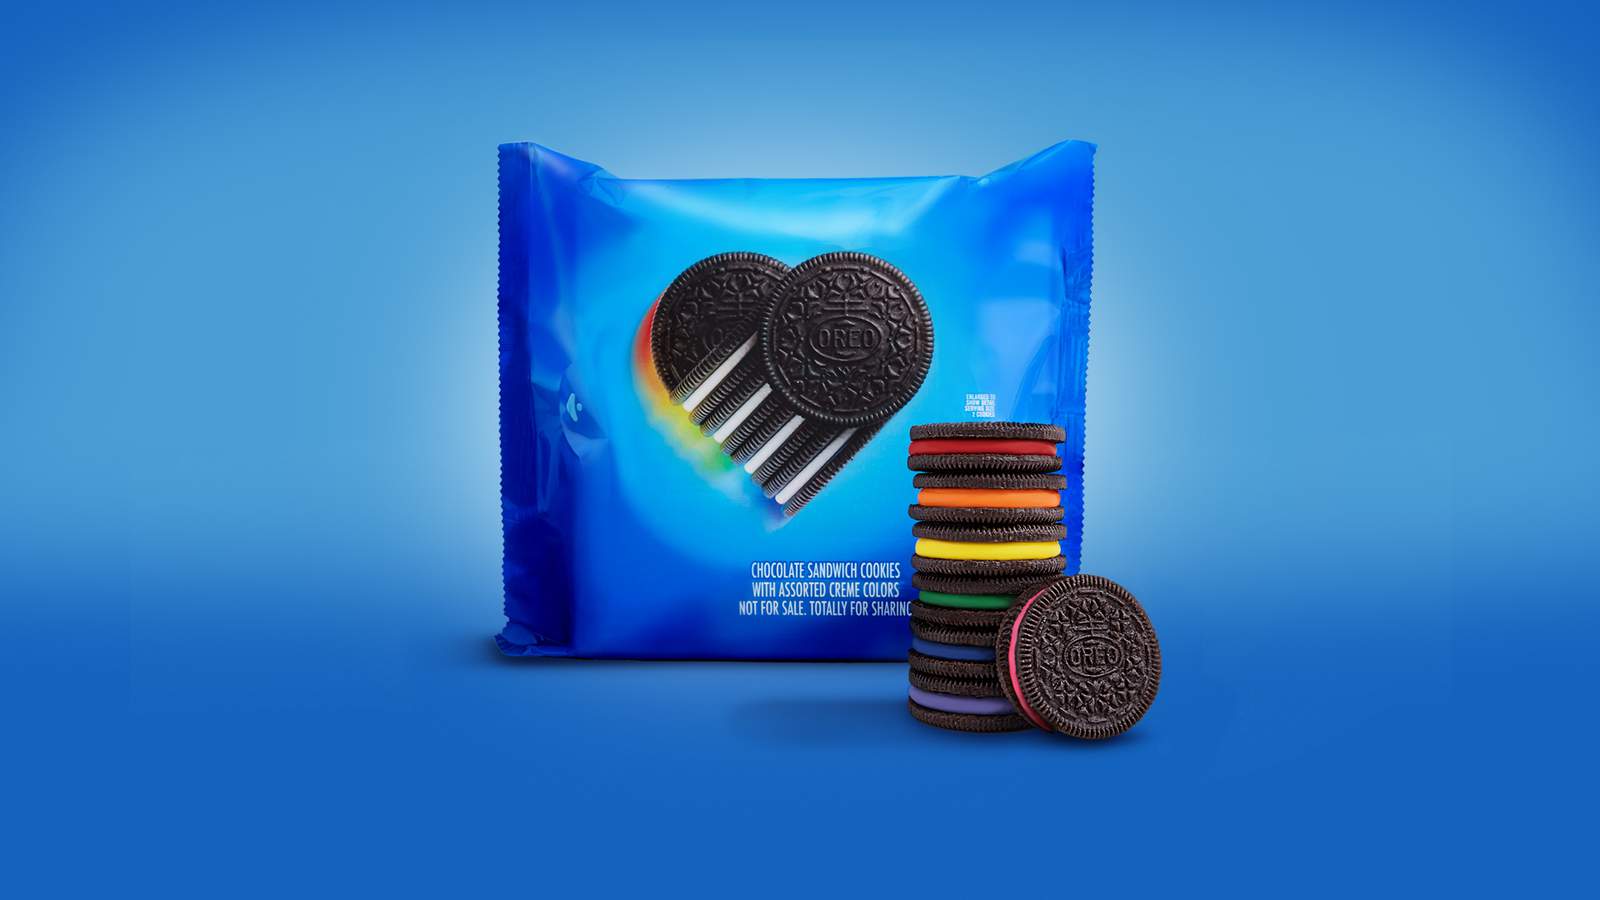 Oreo is giving away 10,000 packs of rainbow cookies. Here’s how to get yours